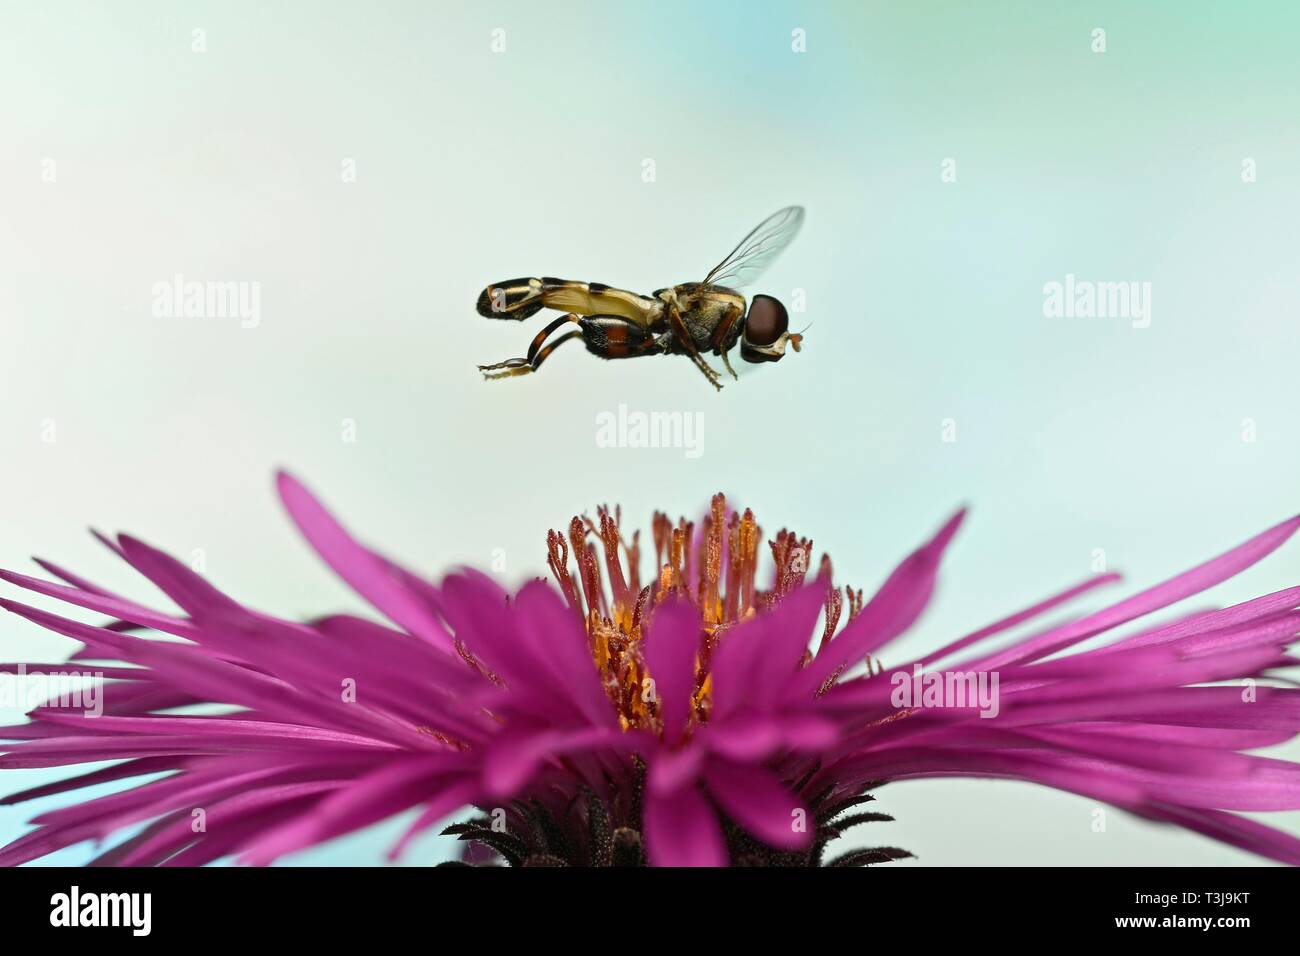 Thick-legged hoverfly (Syritta pipiens) in flight on the flower of a New England aster (Symphyotrichum novae-angliae), Germany Stock Photo